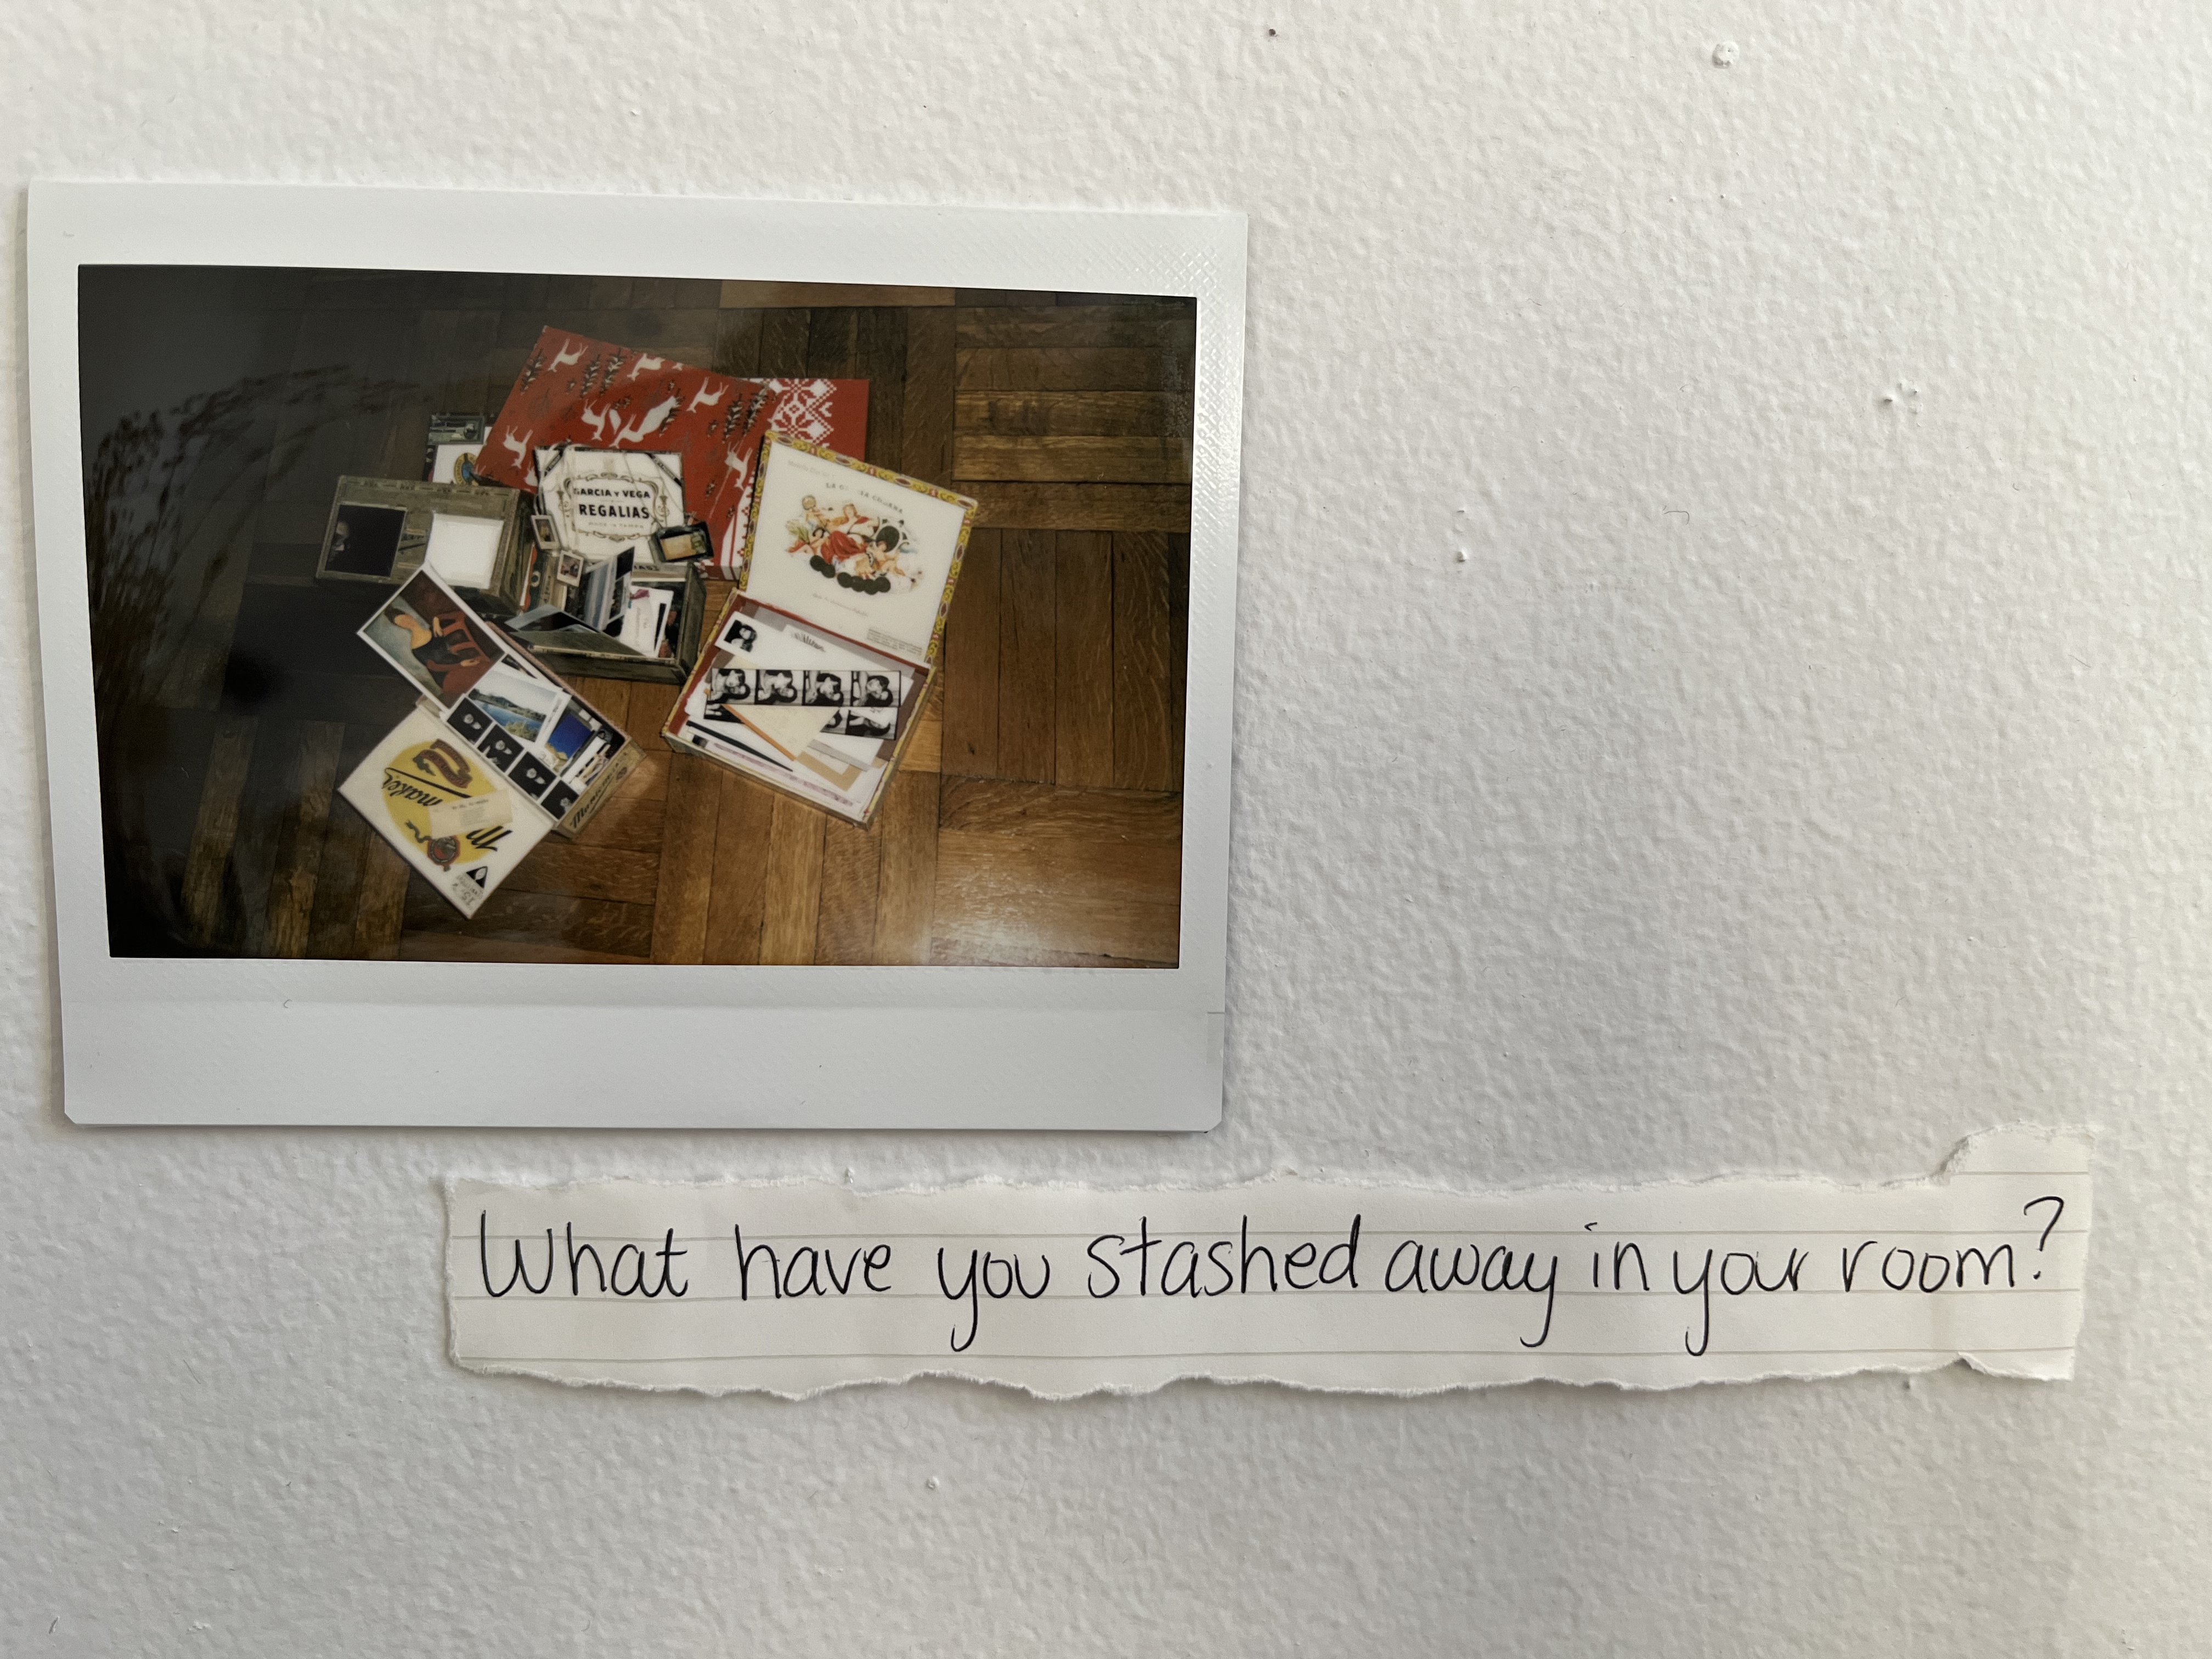 A hand-written note on the wall reads, What have you stashed away in your room?

A polaroid above the note shows the boxes in the previous polaroid, now open so we can see some of their contents. They are filled with photo strips, polaroids, and postcards. 